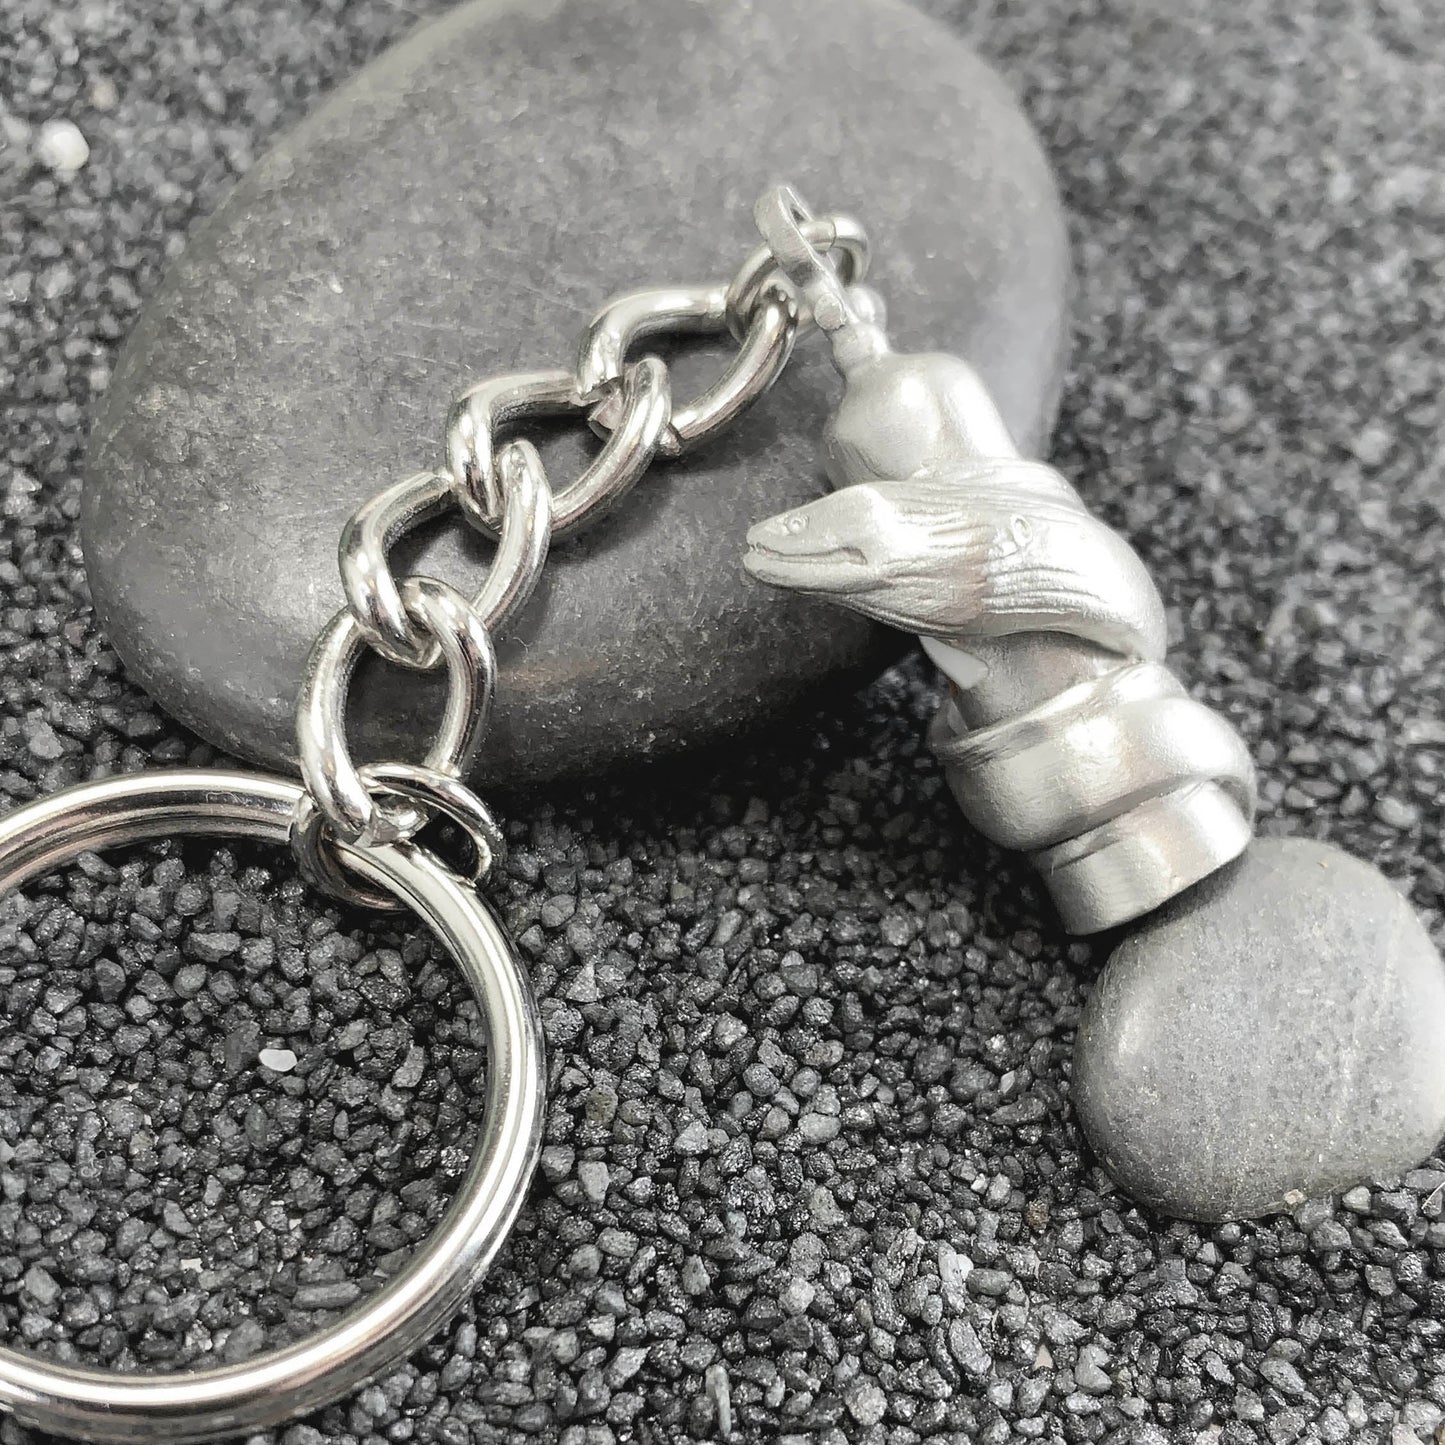 Moray Eel Key Chain- Scuba Diving Key Chain, Scuba Tank Key Chain with Moray Eel, Scuba Diving Gifts, Moray Eel with Scuba Tank Key Fob with Dive Flag - The Tool Store